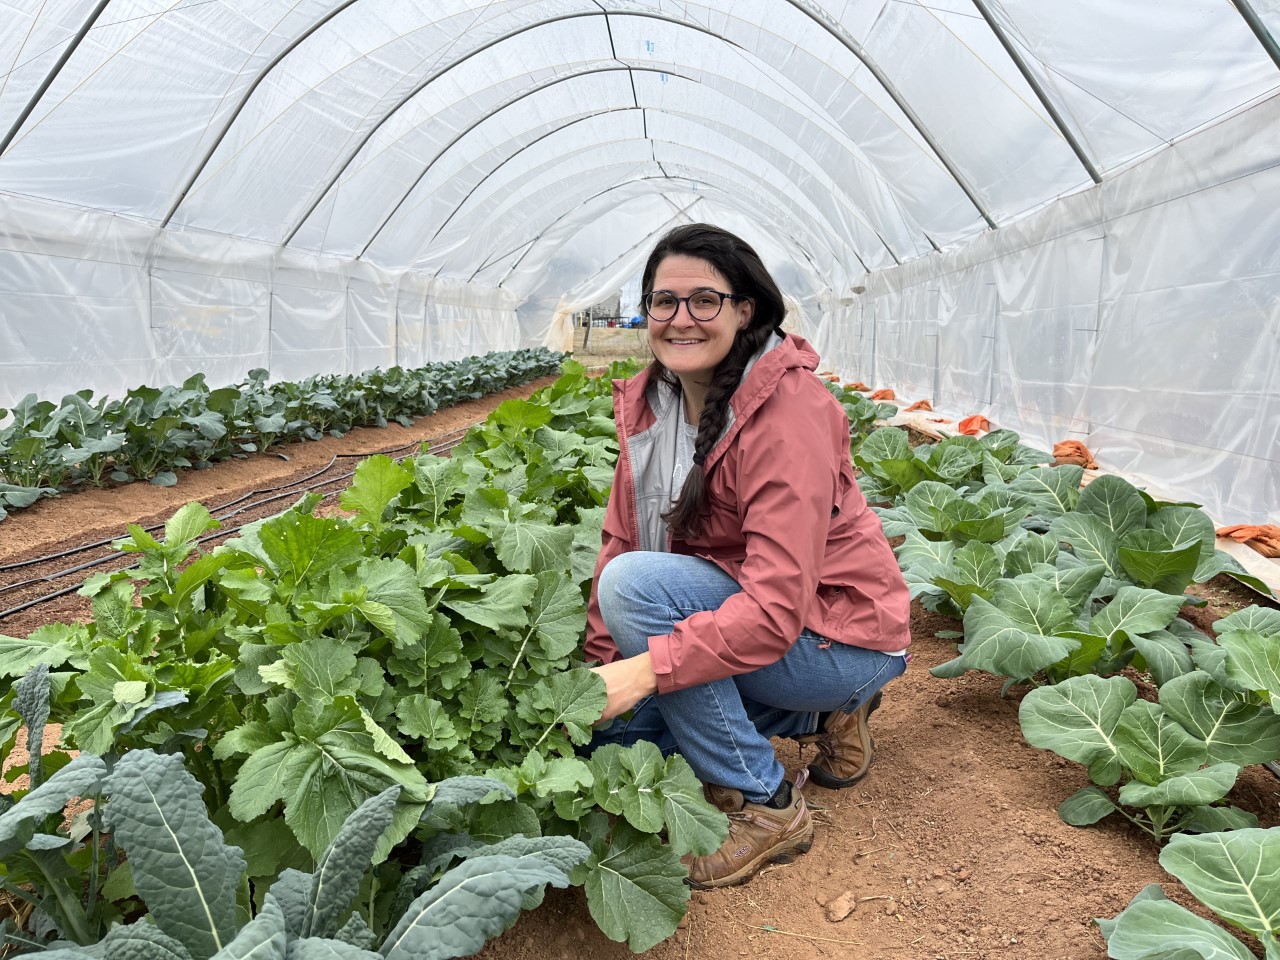 Horticulture Assistant Professor Kate Cassity-Duffey specializes in organic production. (Submitted photo)